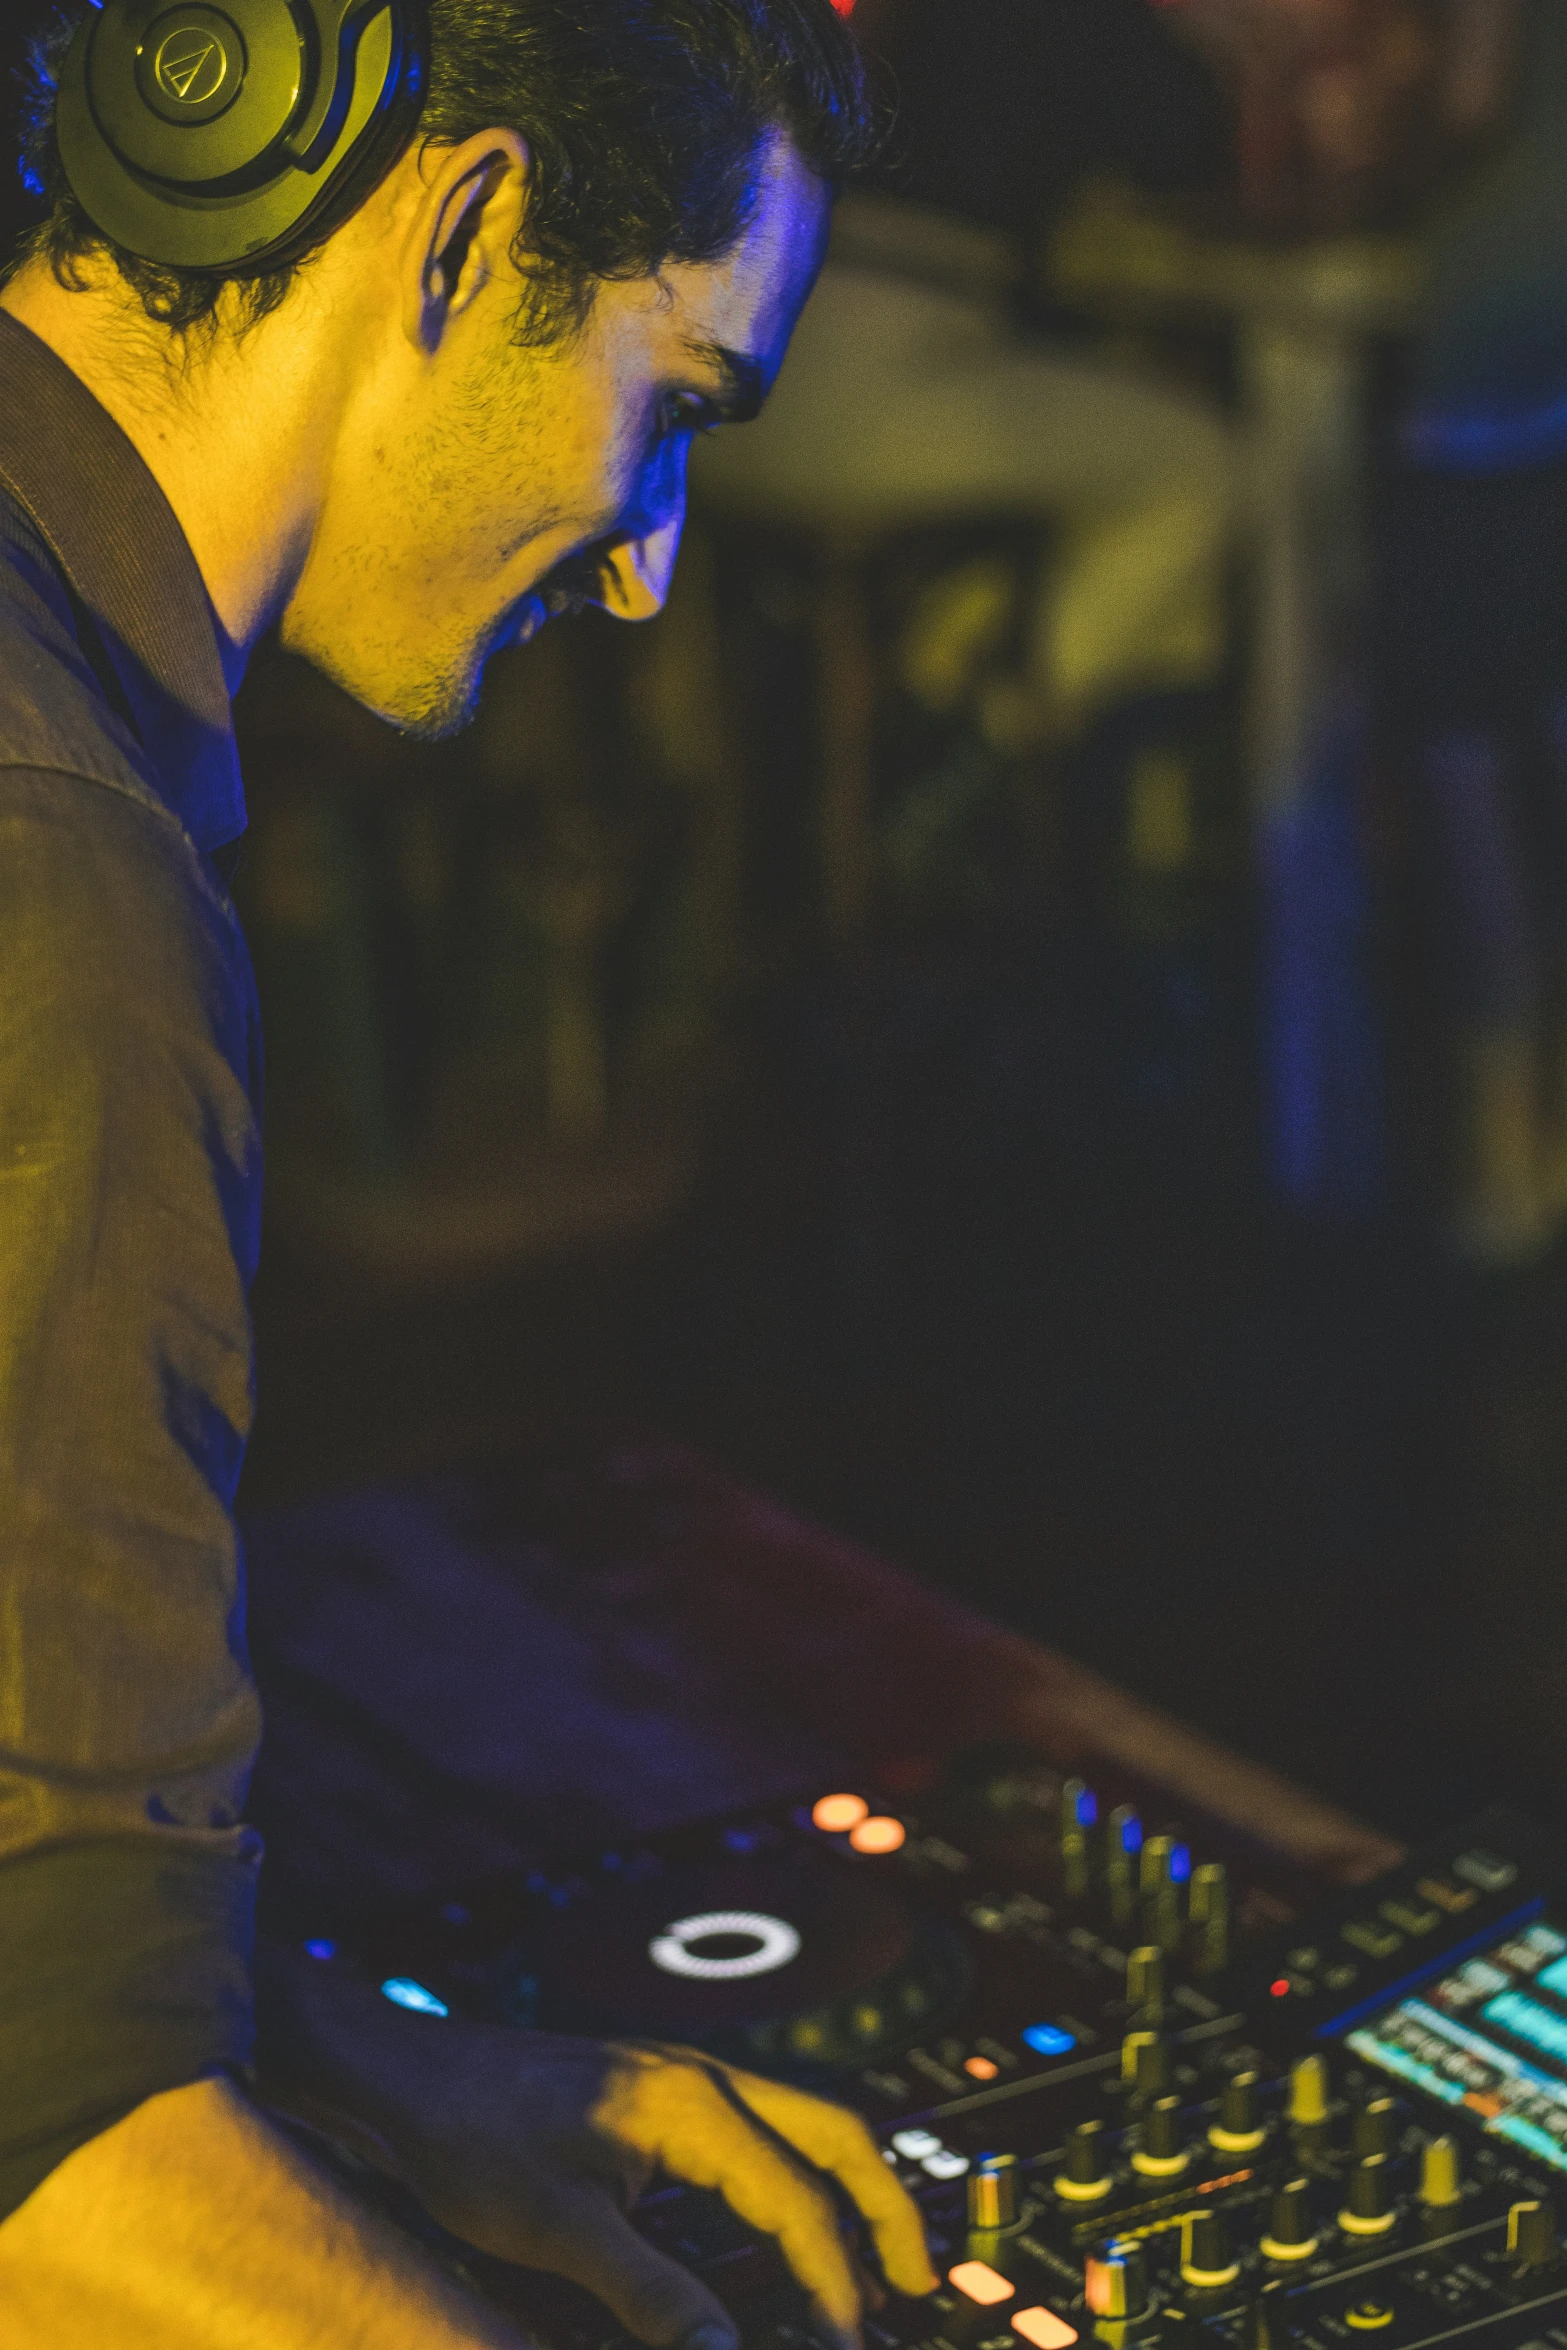 dj using mixing board with headphones on at party